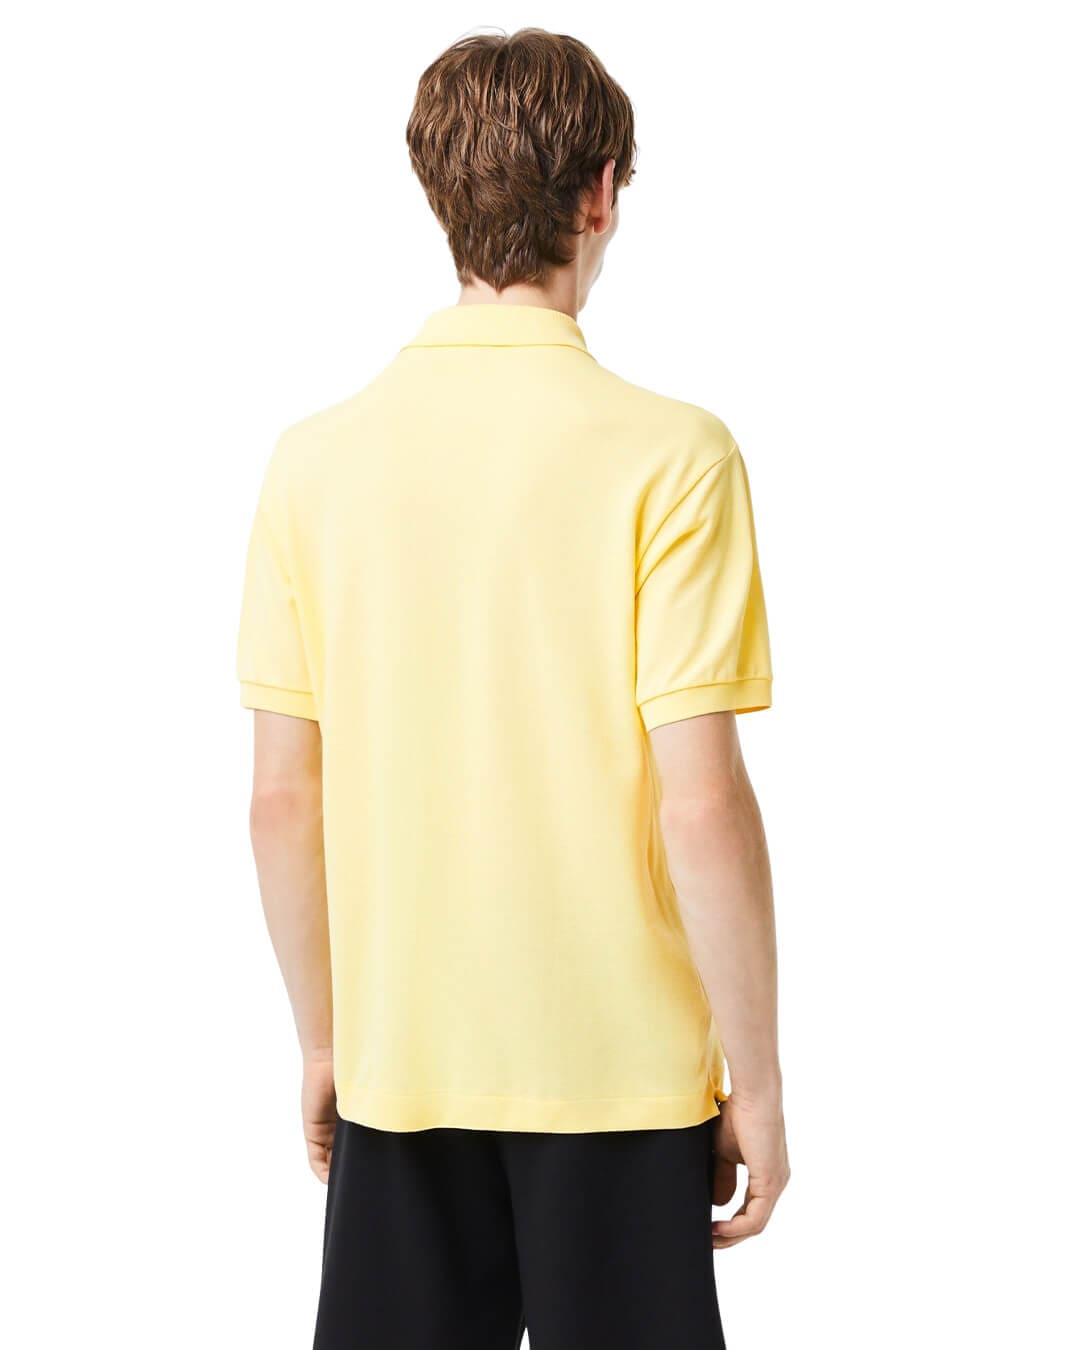 Lacoste Polo Shirts Lacoste Classic Fit L.12.12 Yellow Polo Shirt